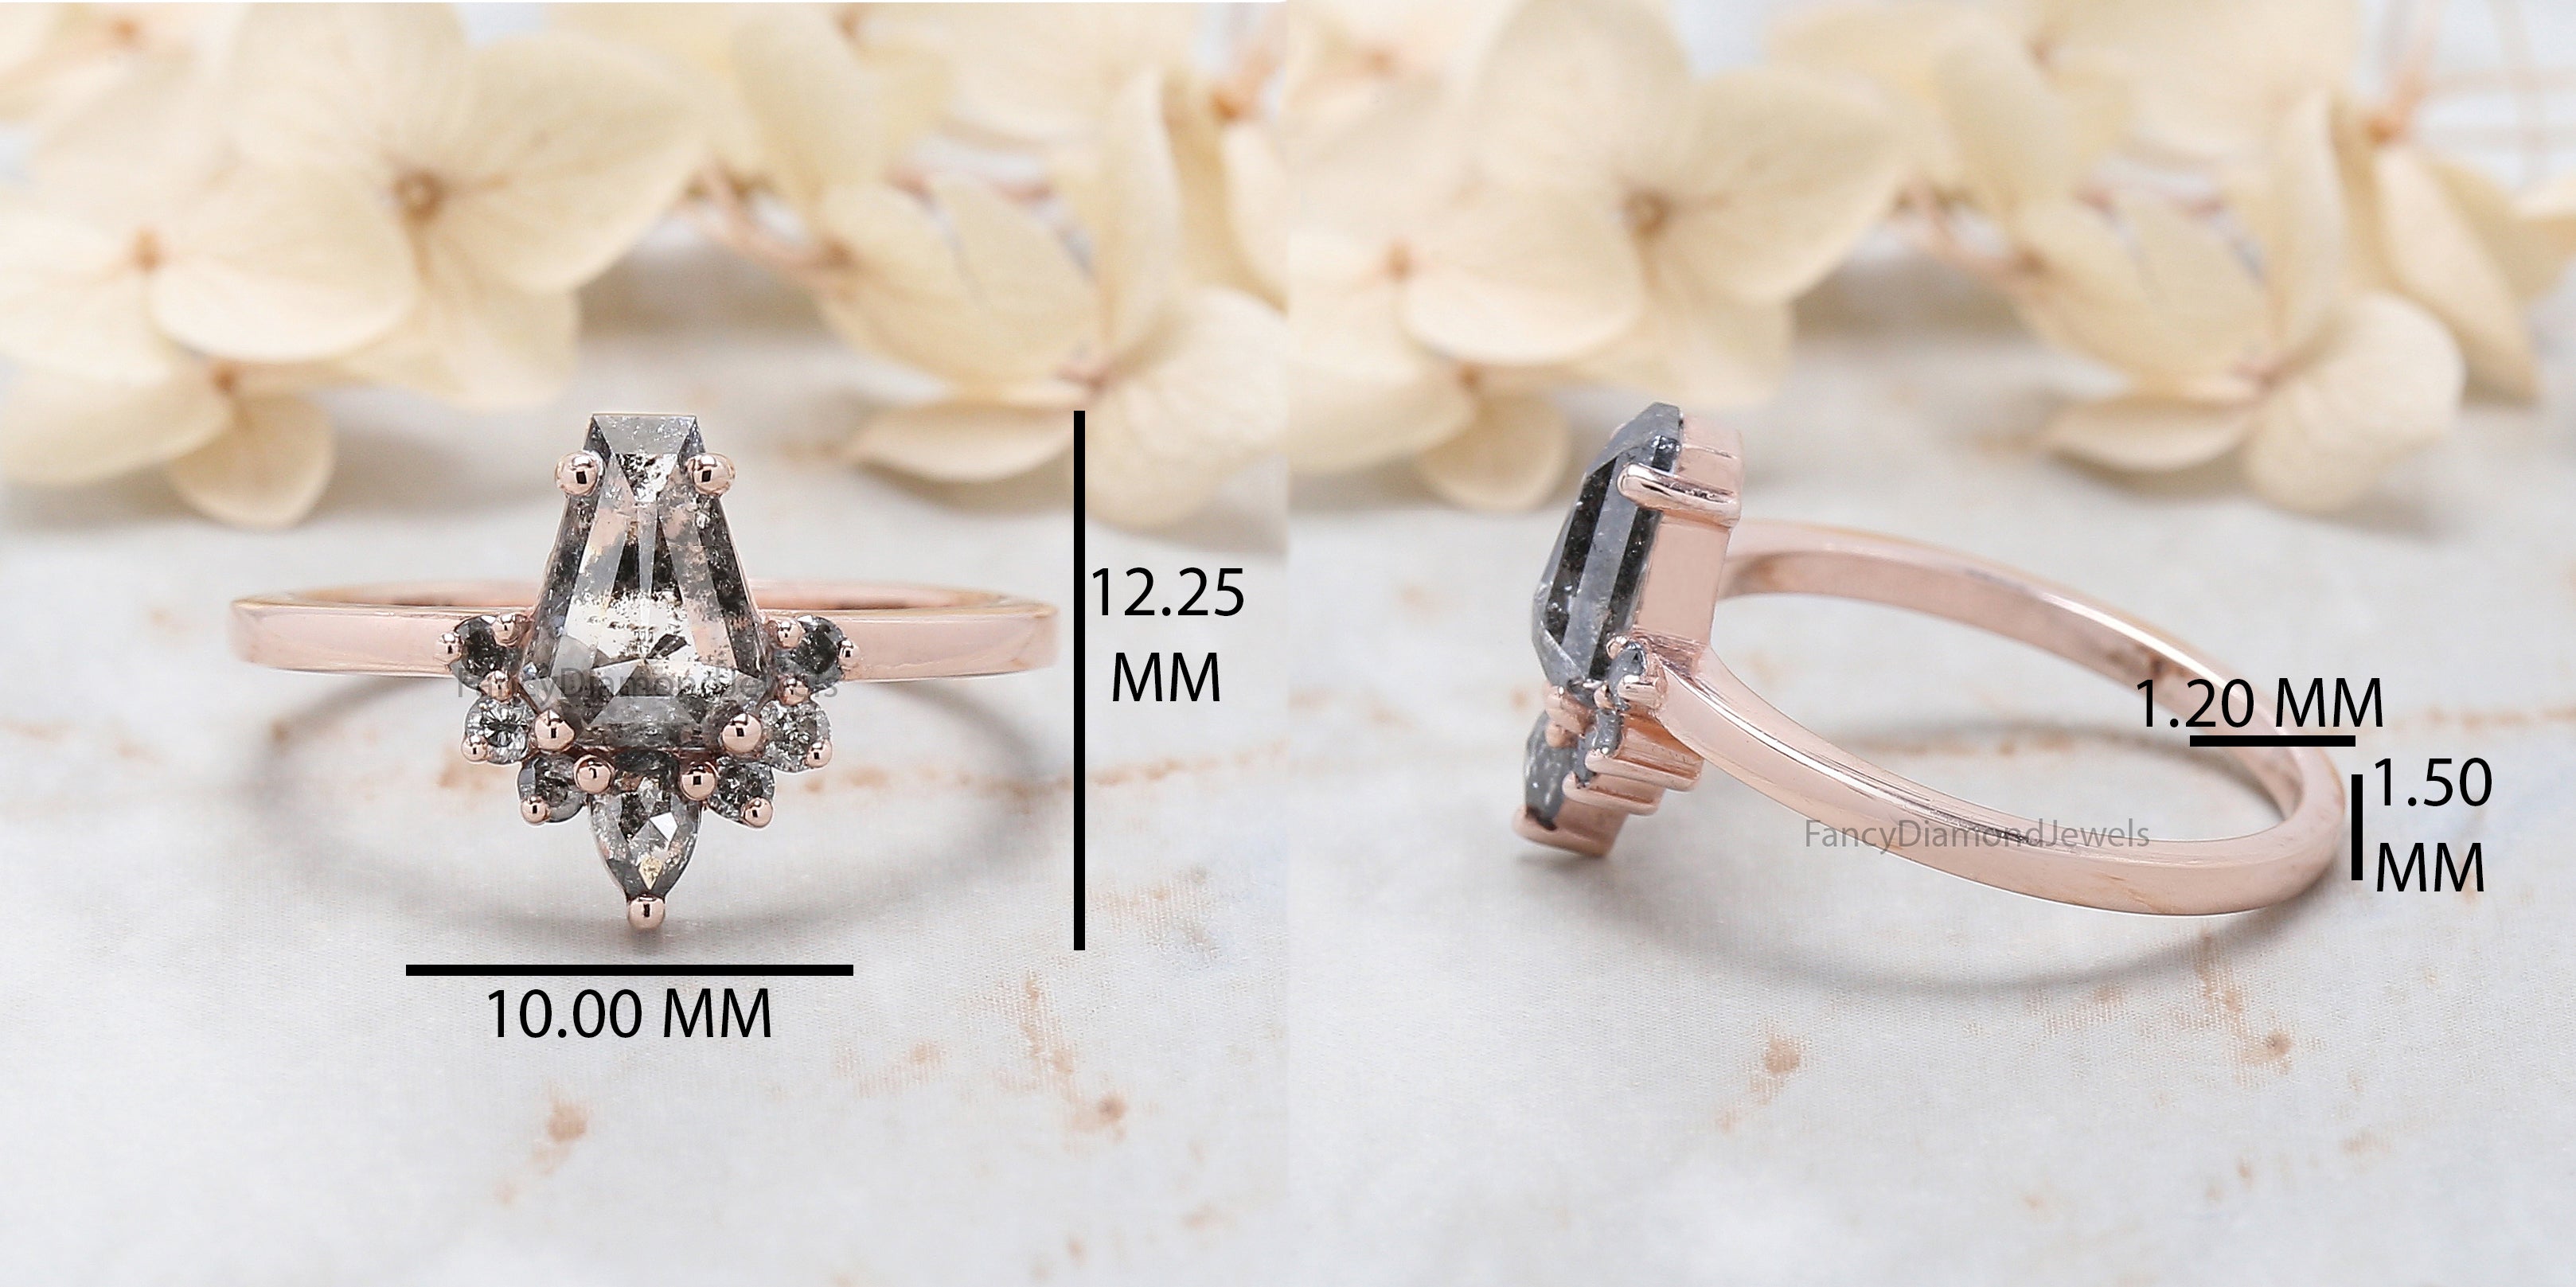 Coffin Cut Salt And Pepper Diamond Ring 1.08 Ct 7.75 MM Coffin Diamond Ring 14K Solid Rose Gold Silver Engagement Ring Gift For Her QL1425